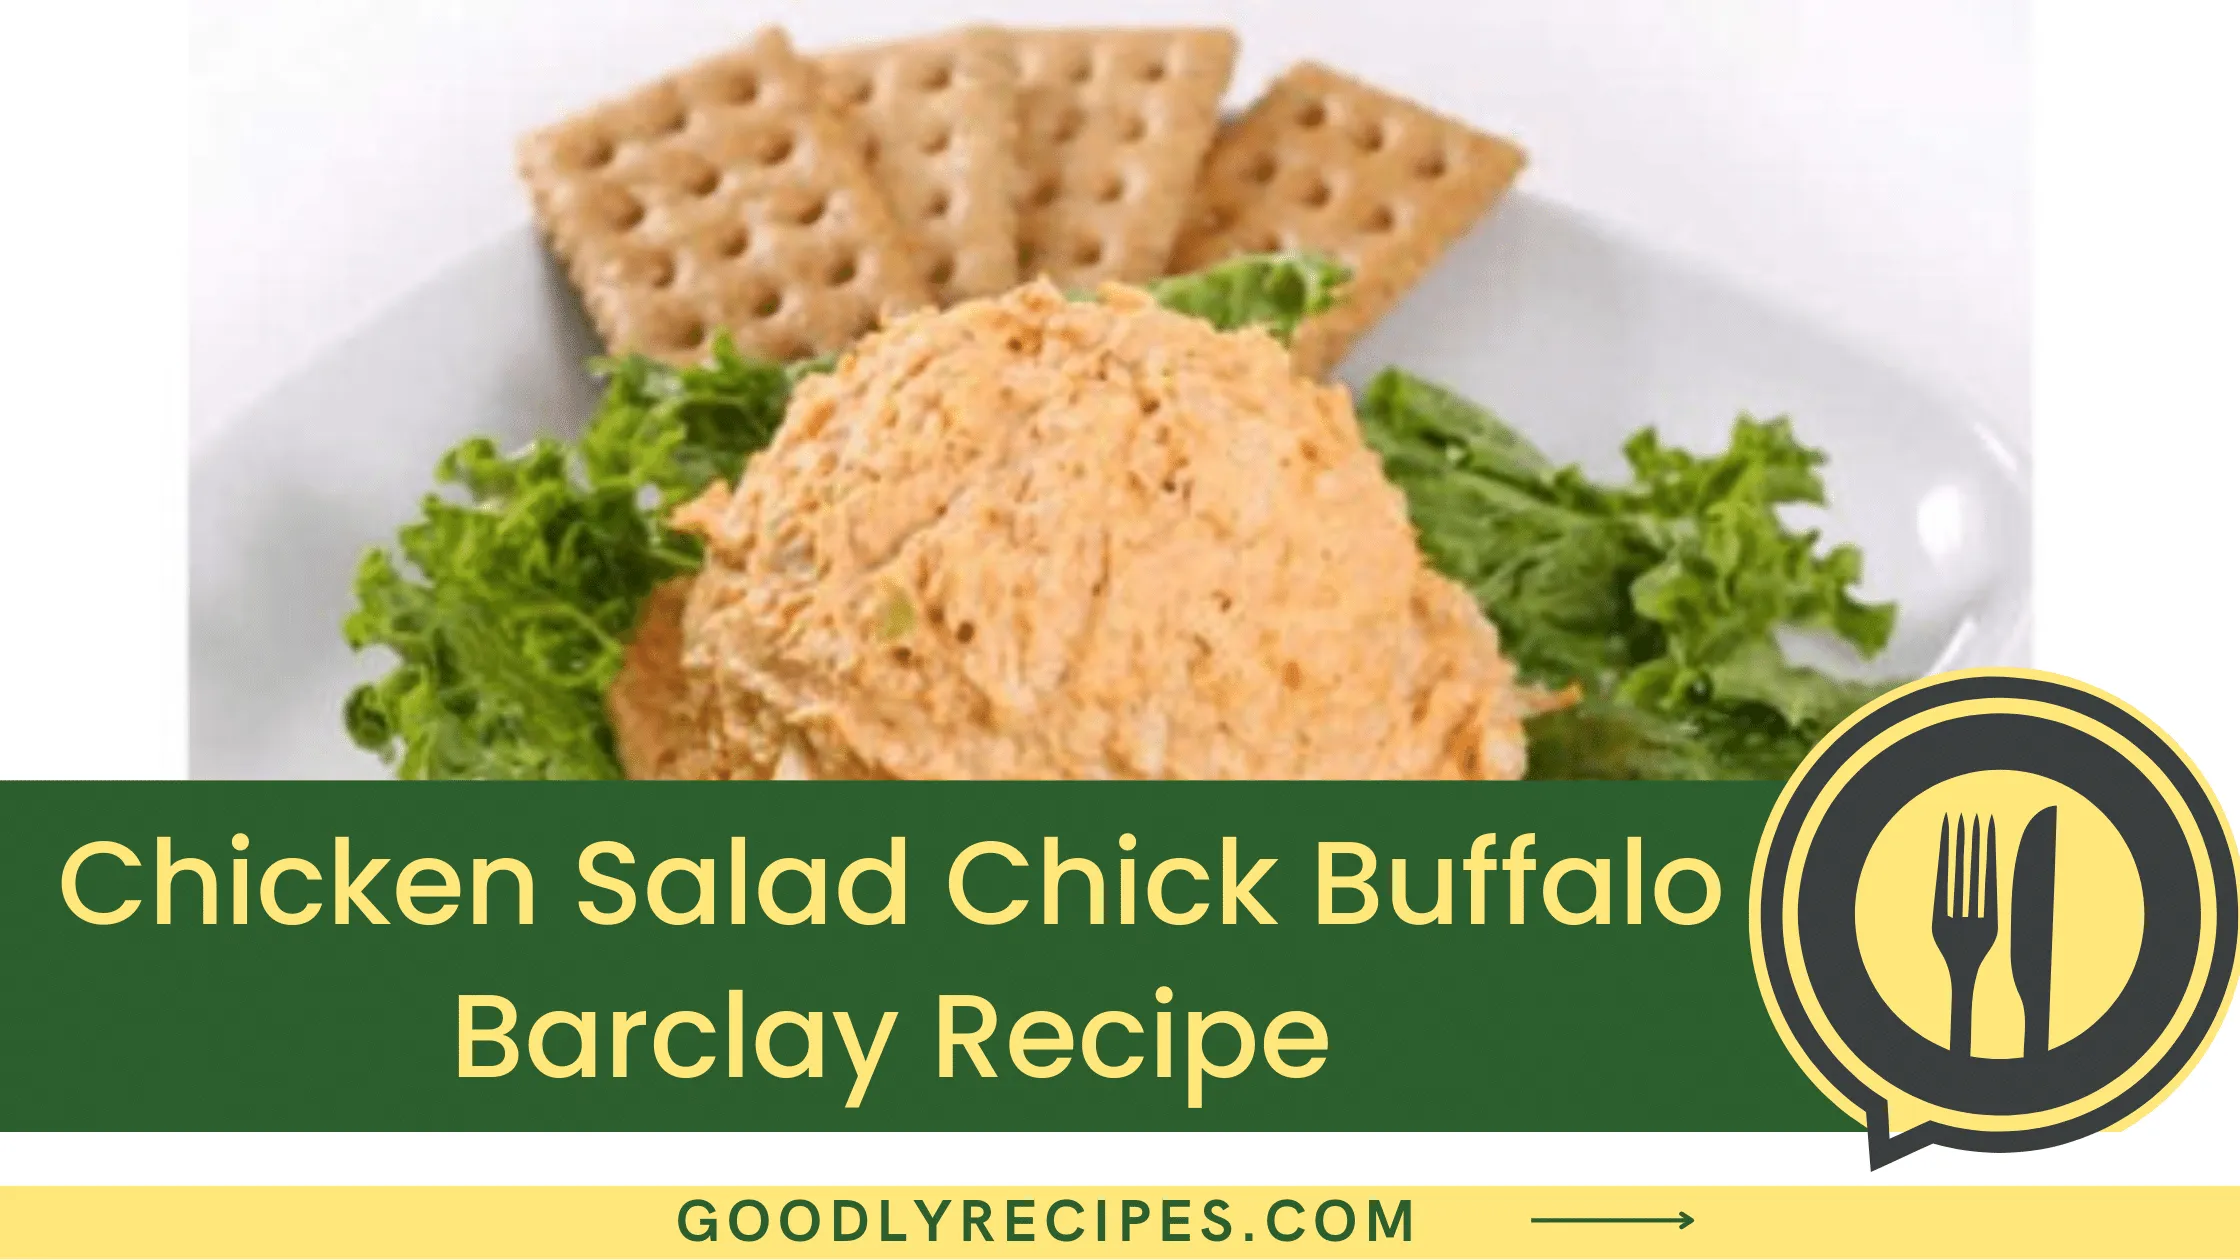 Chicken Salad Chick Buffalo Barclay Recipe - For Food Lovers